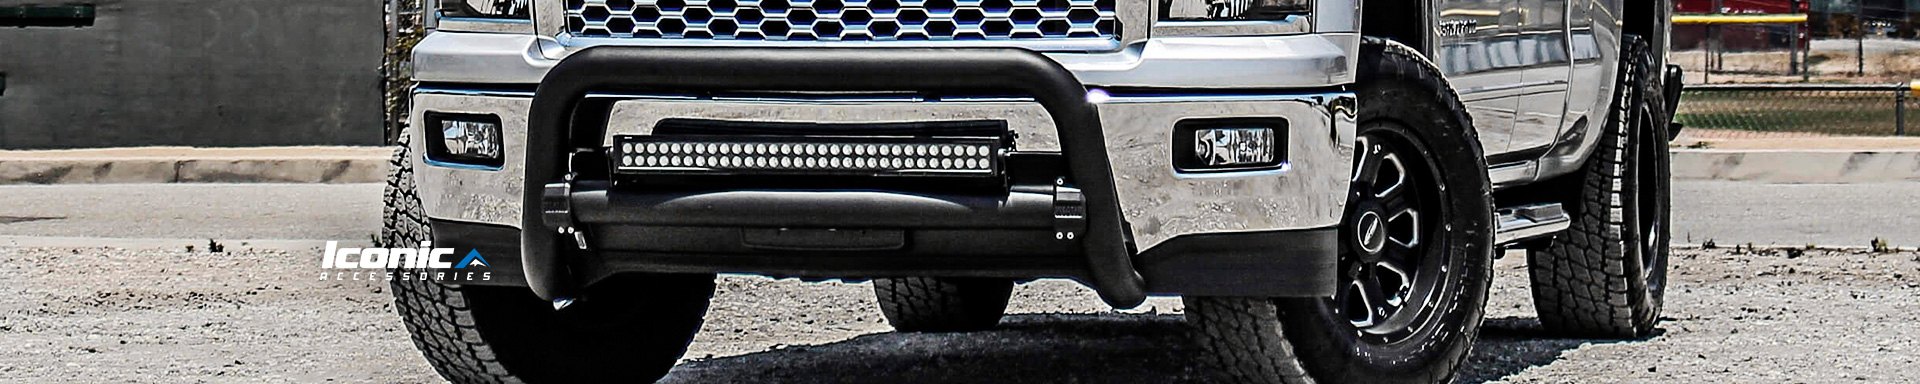 Iconic Accessories Off-Road Lights